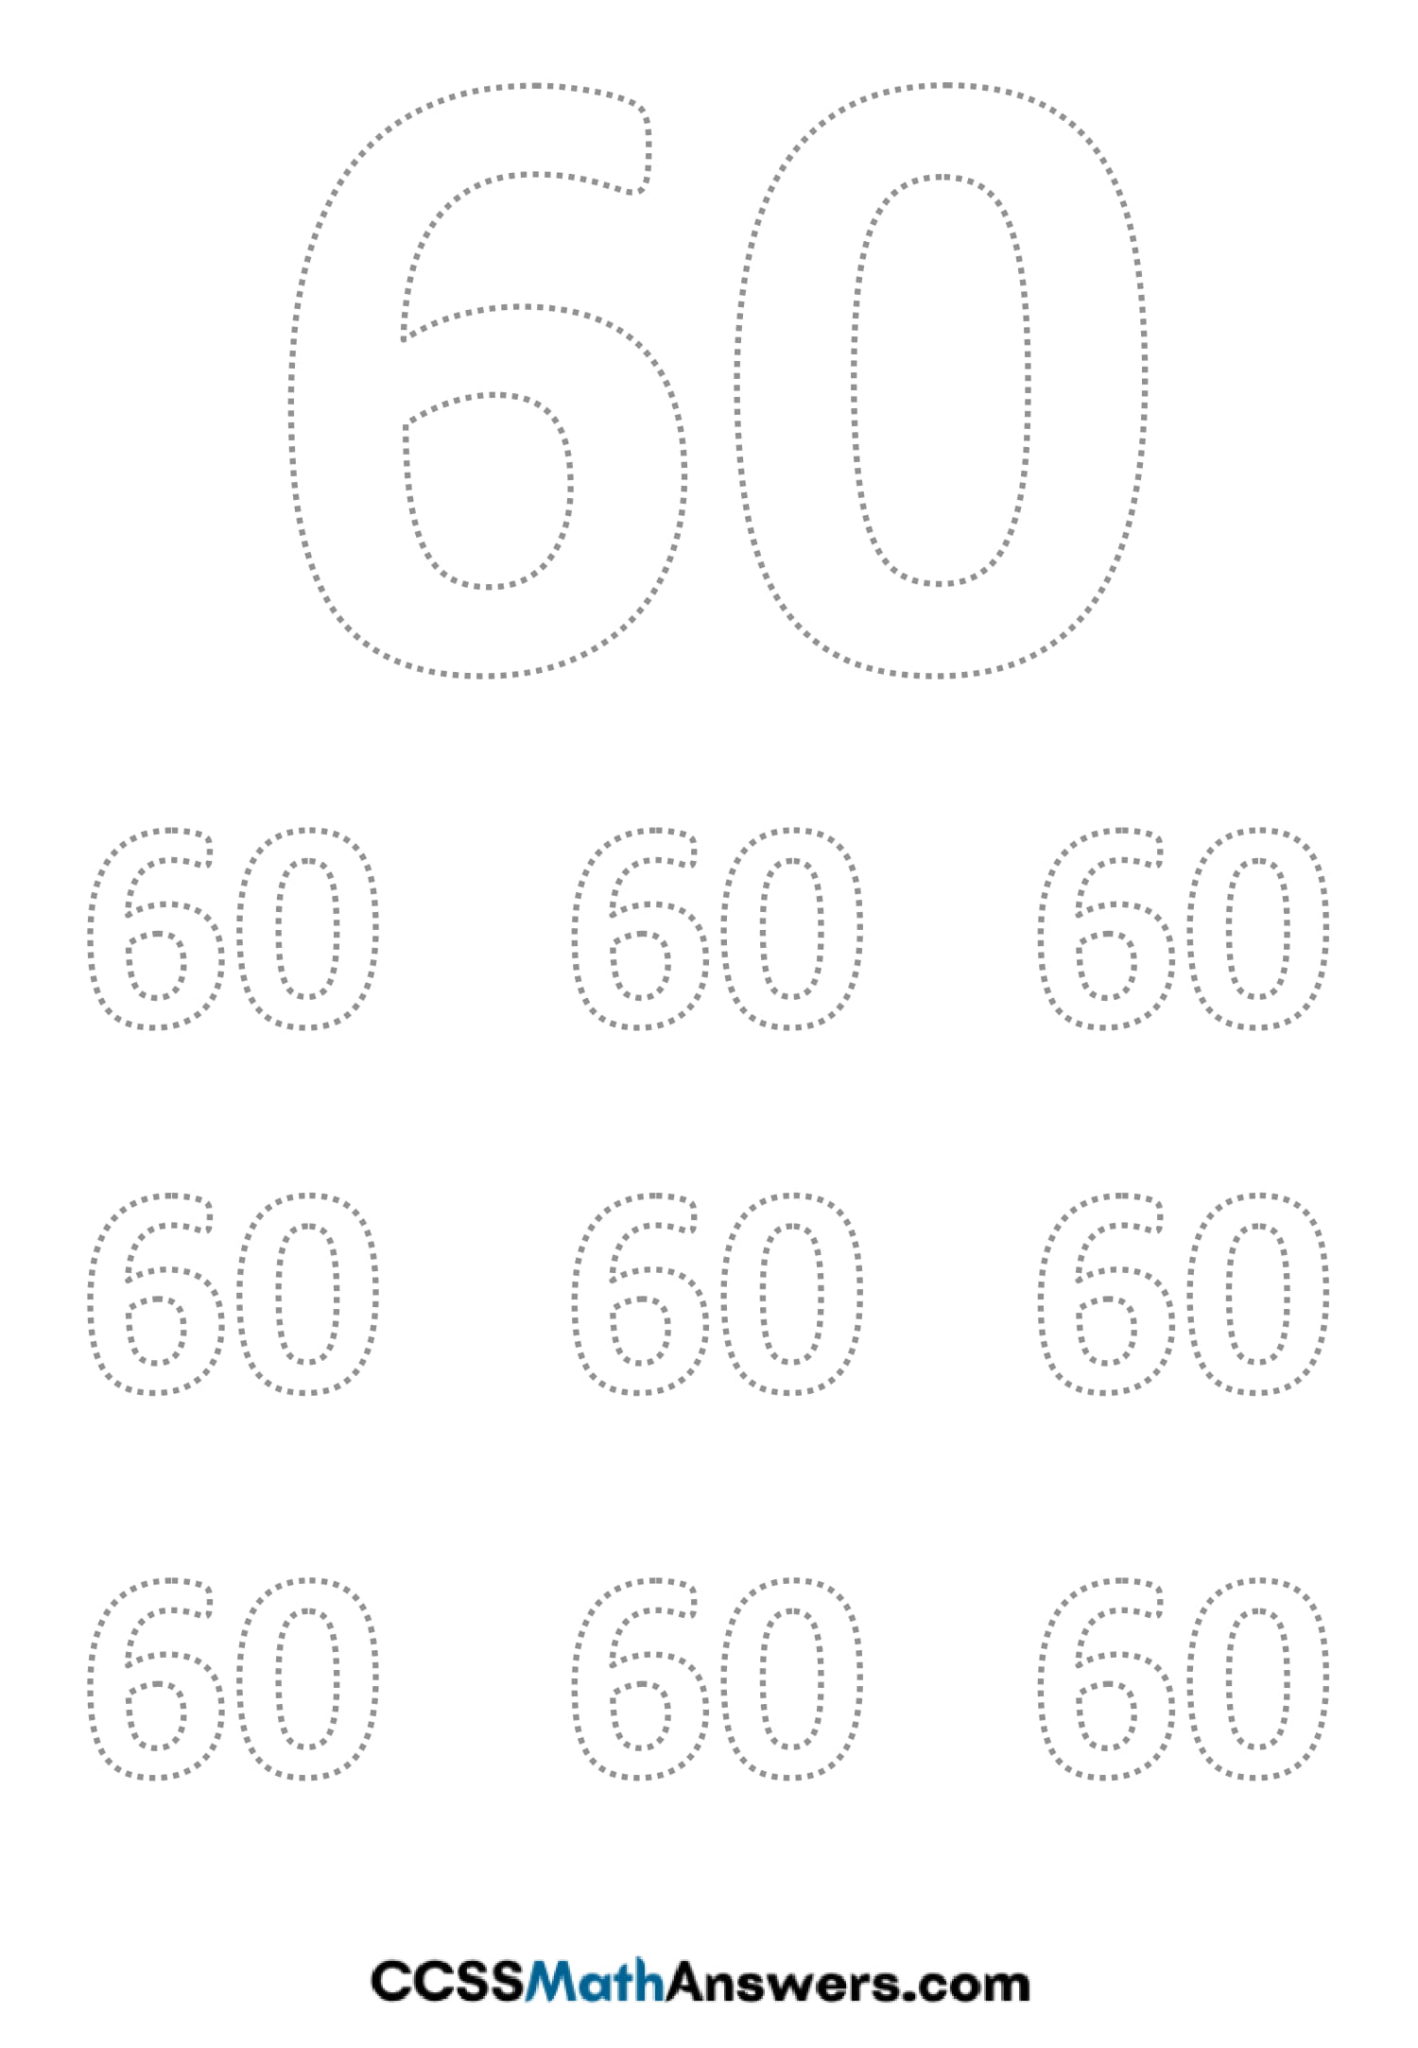 worksheet-on-number-60-free-printable-number-60-tracing-counting-writing-worksheets-ccss